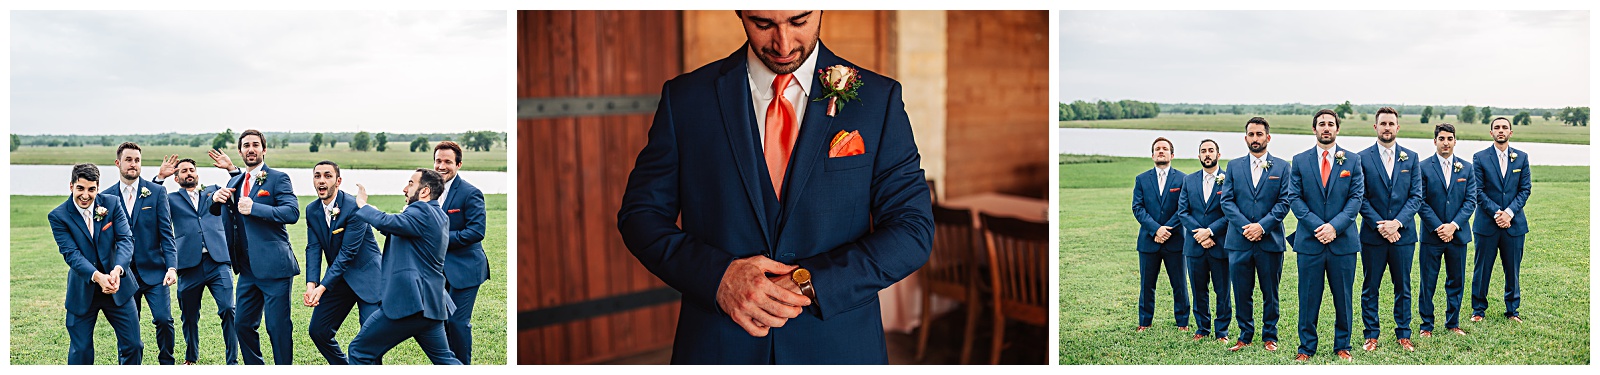 The Groom and his squad for this vibrant boho wedding | Emery's Buffalo Creek